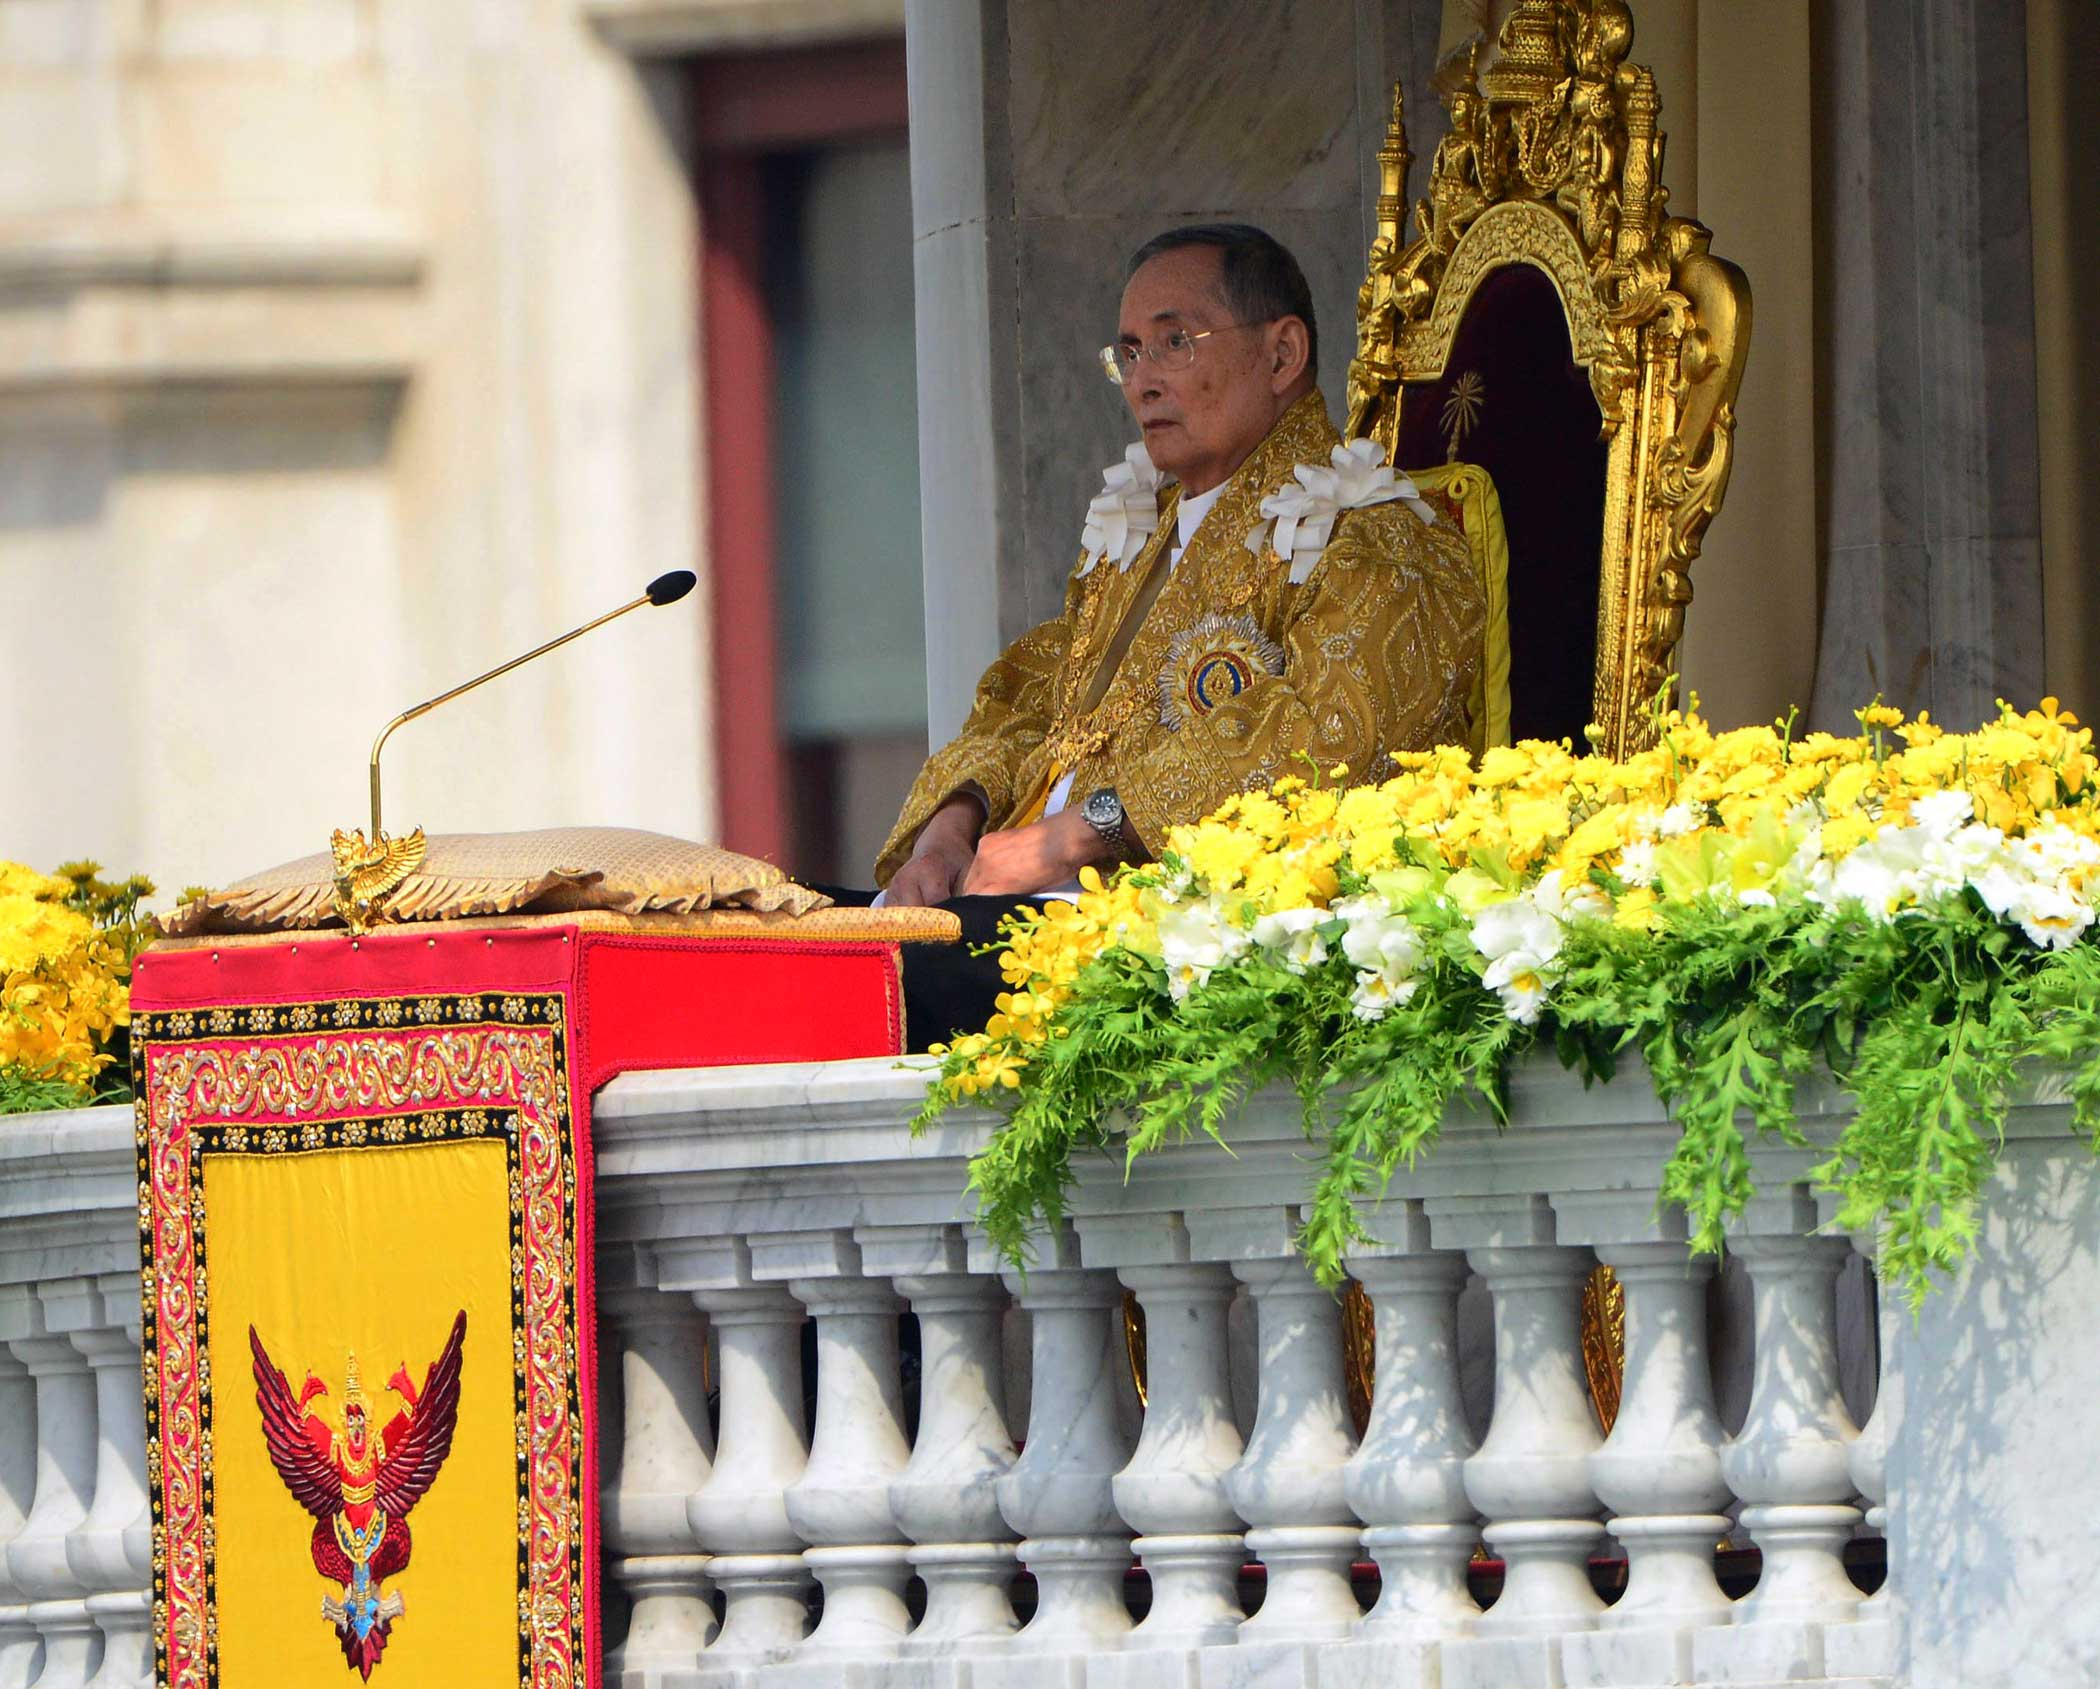 Thai King Bhumibol Adulyadej appears to address a crowd from the balcony at the Anantha Samakhom Throne Hall in Bangkok, Thailand, during his 85th birthday celebration on Dec. 5, 2012.